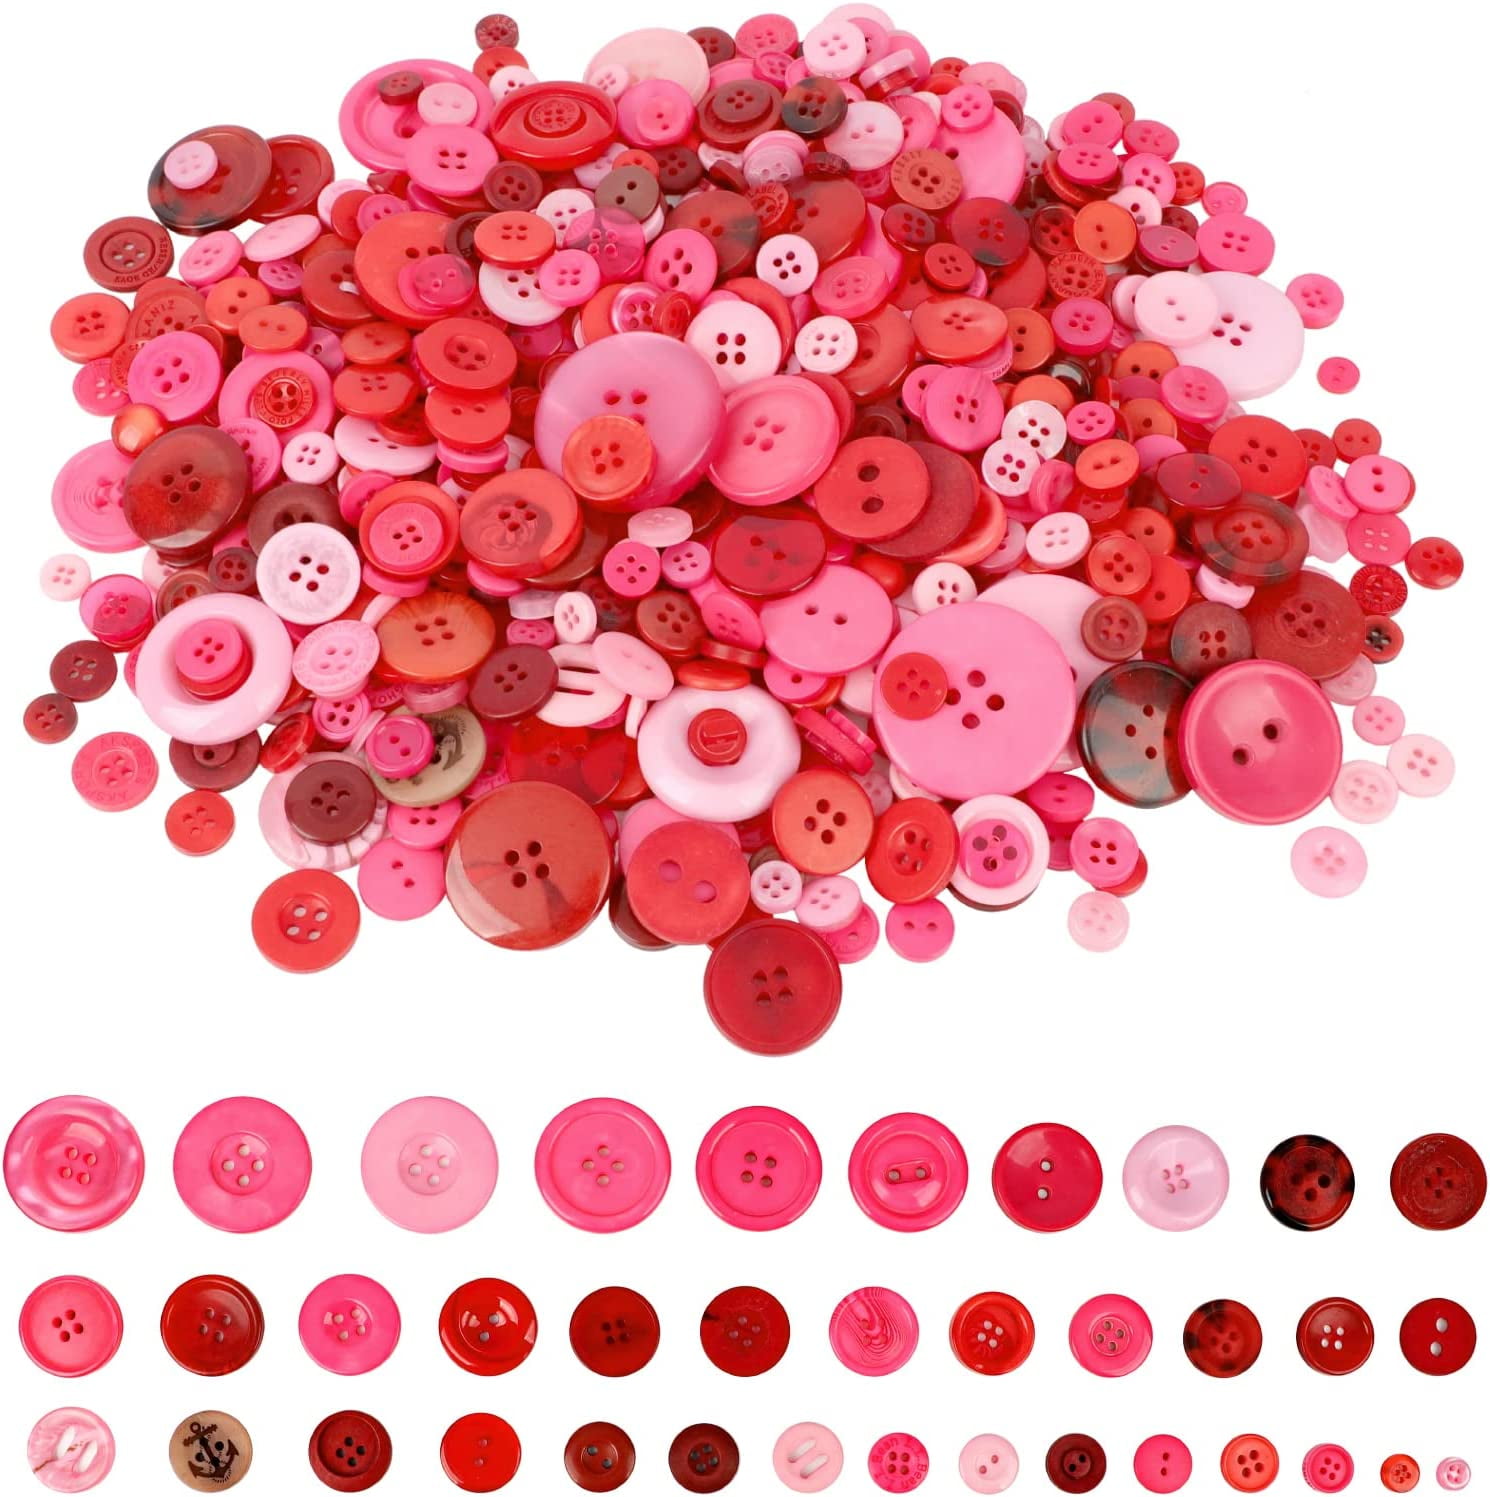 Esoca 650pcs Red Buttons for Craft Art Crafts Button Red Assorted Sizes for Crafts DIY